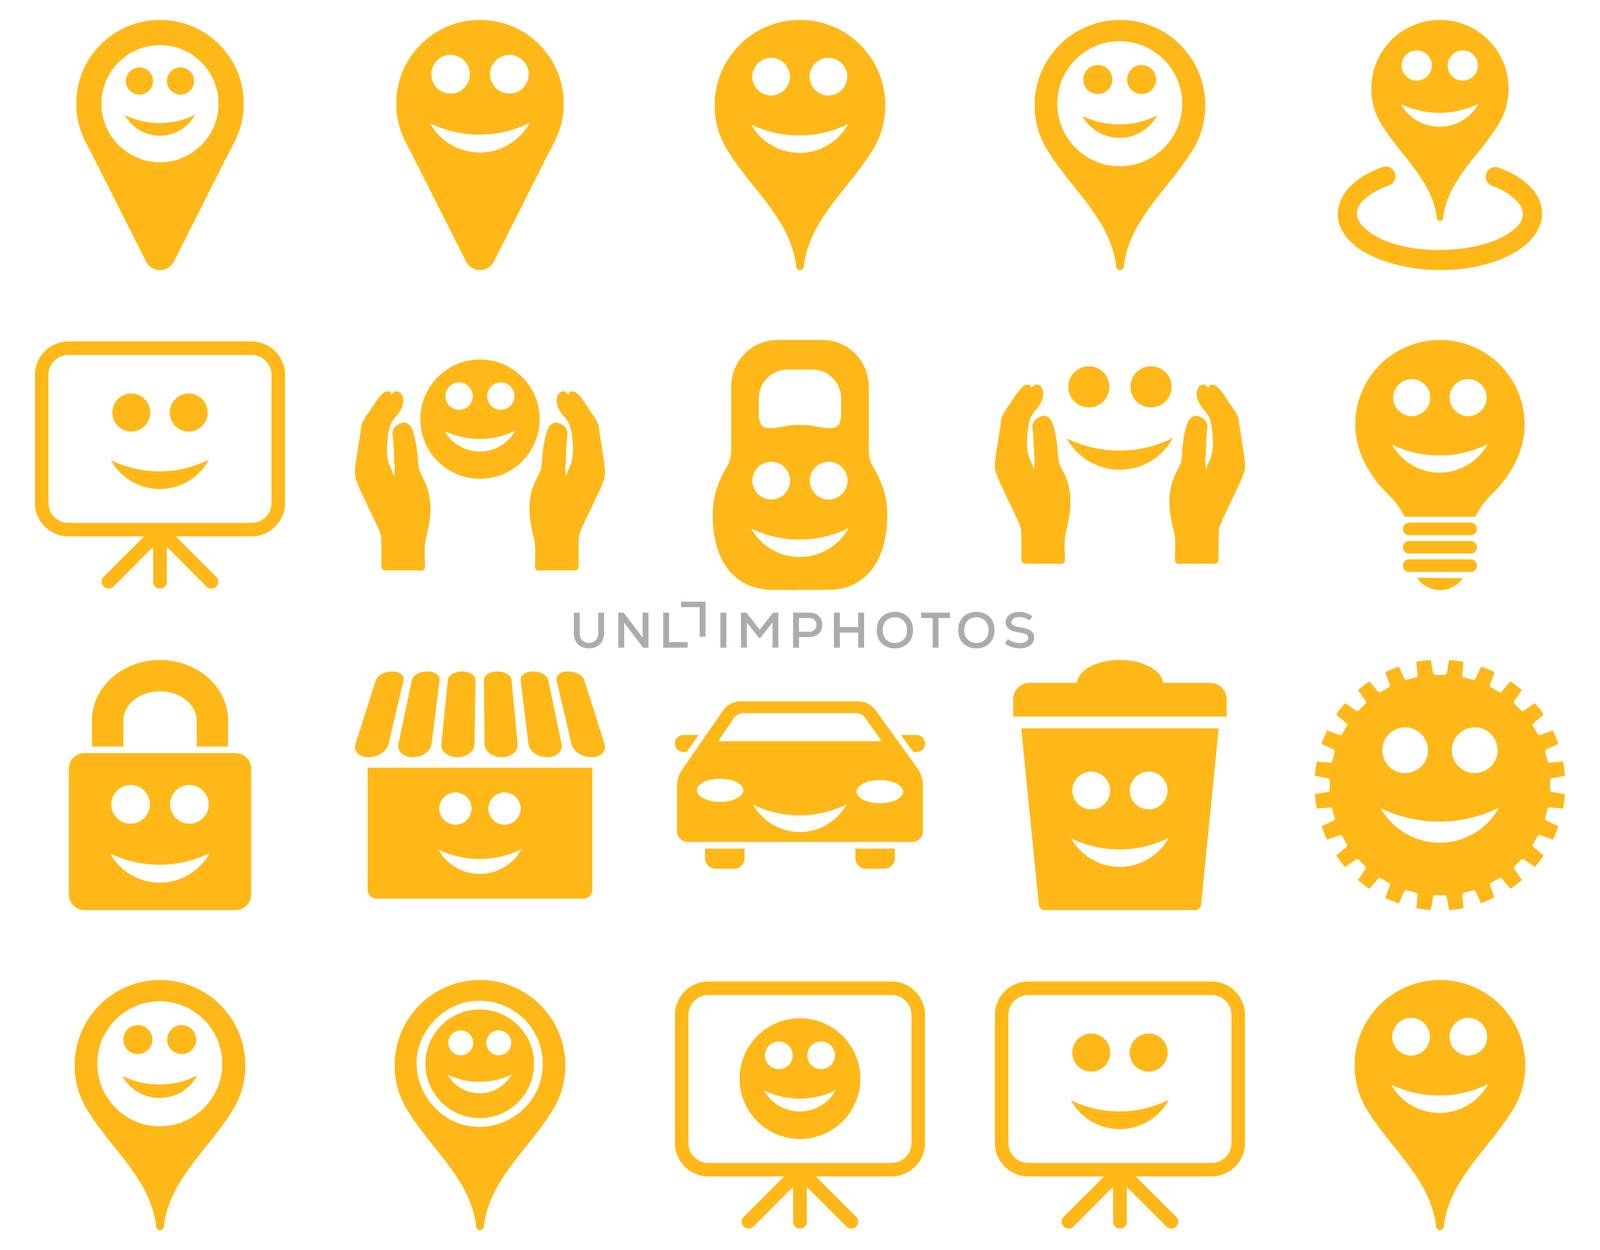 Tools, options, smiles, objects icons. Glyph set style is flat images, yellow symbols, isolated on a white background.